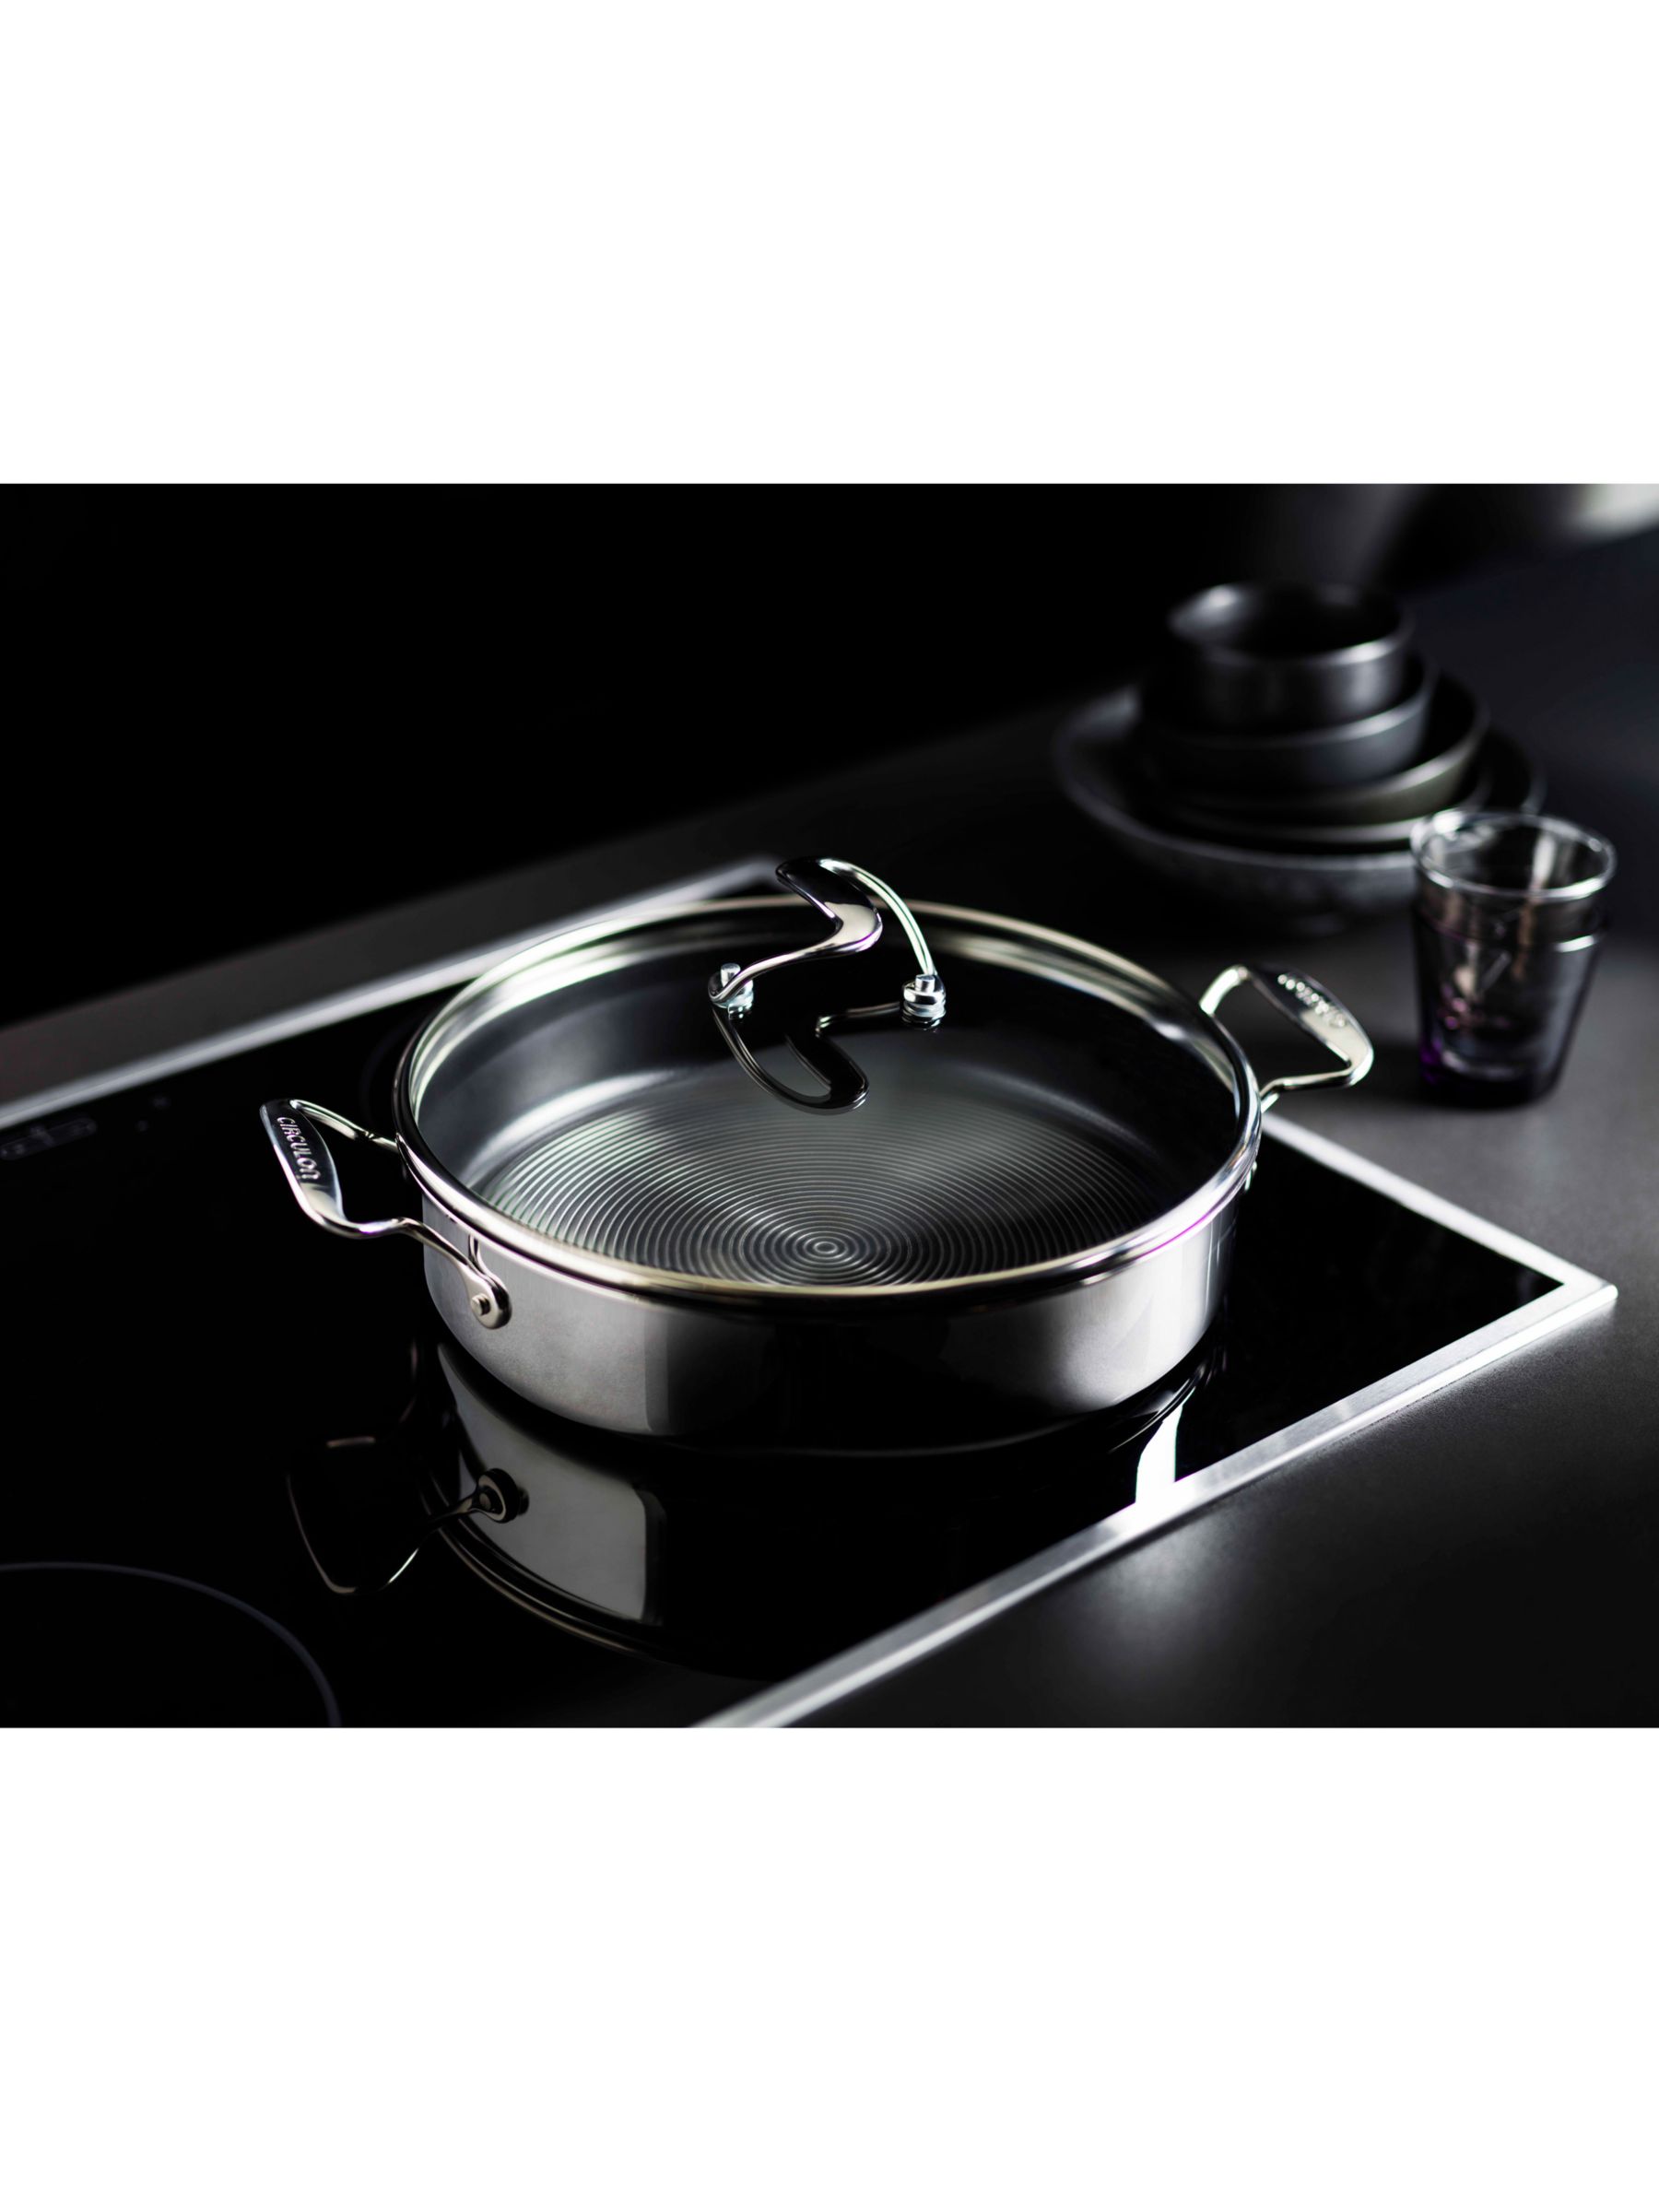 Circulon Stainless Steel Saucepan with Lid and SteelShield Hybrid Stainless  Nonstick, 4-Quart